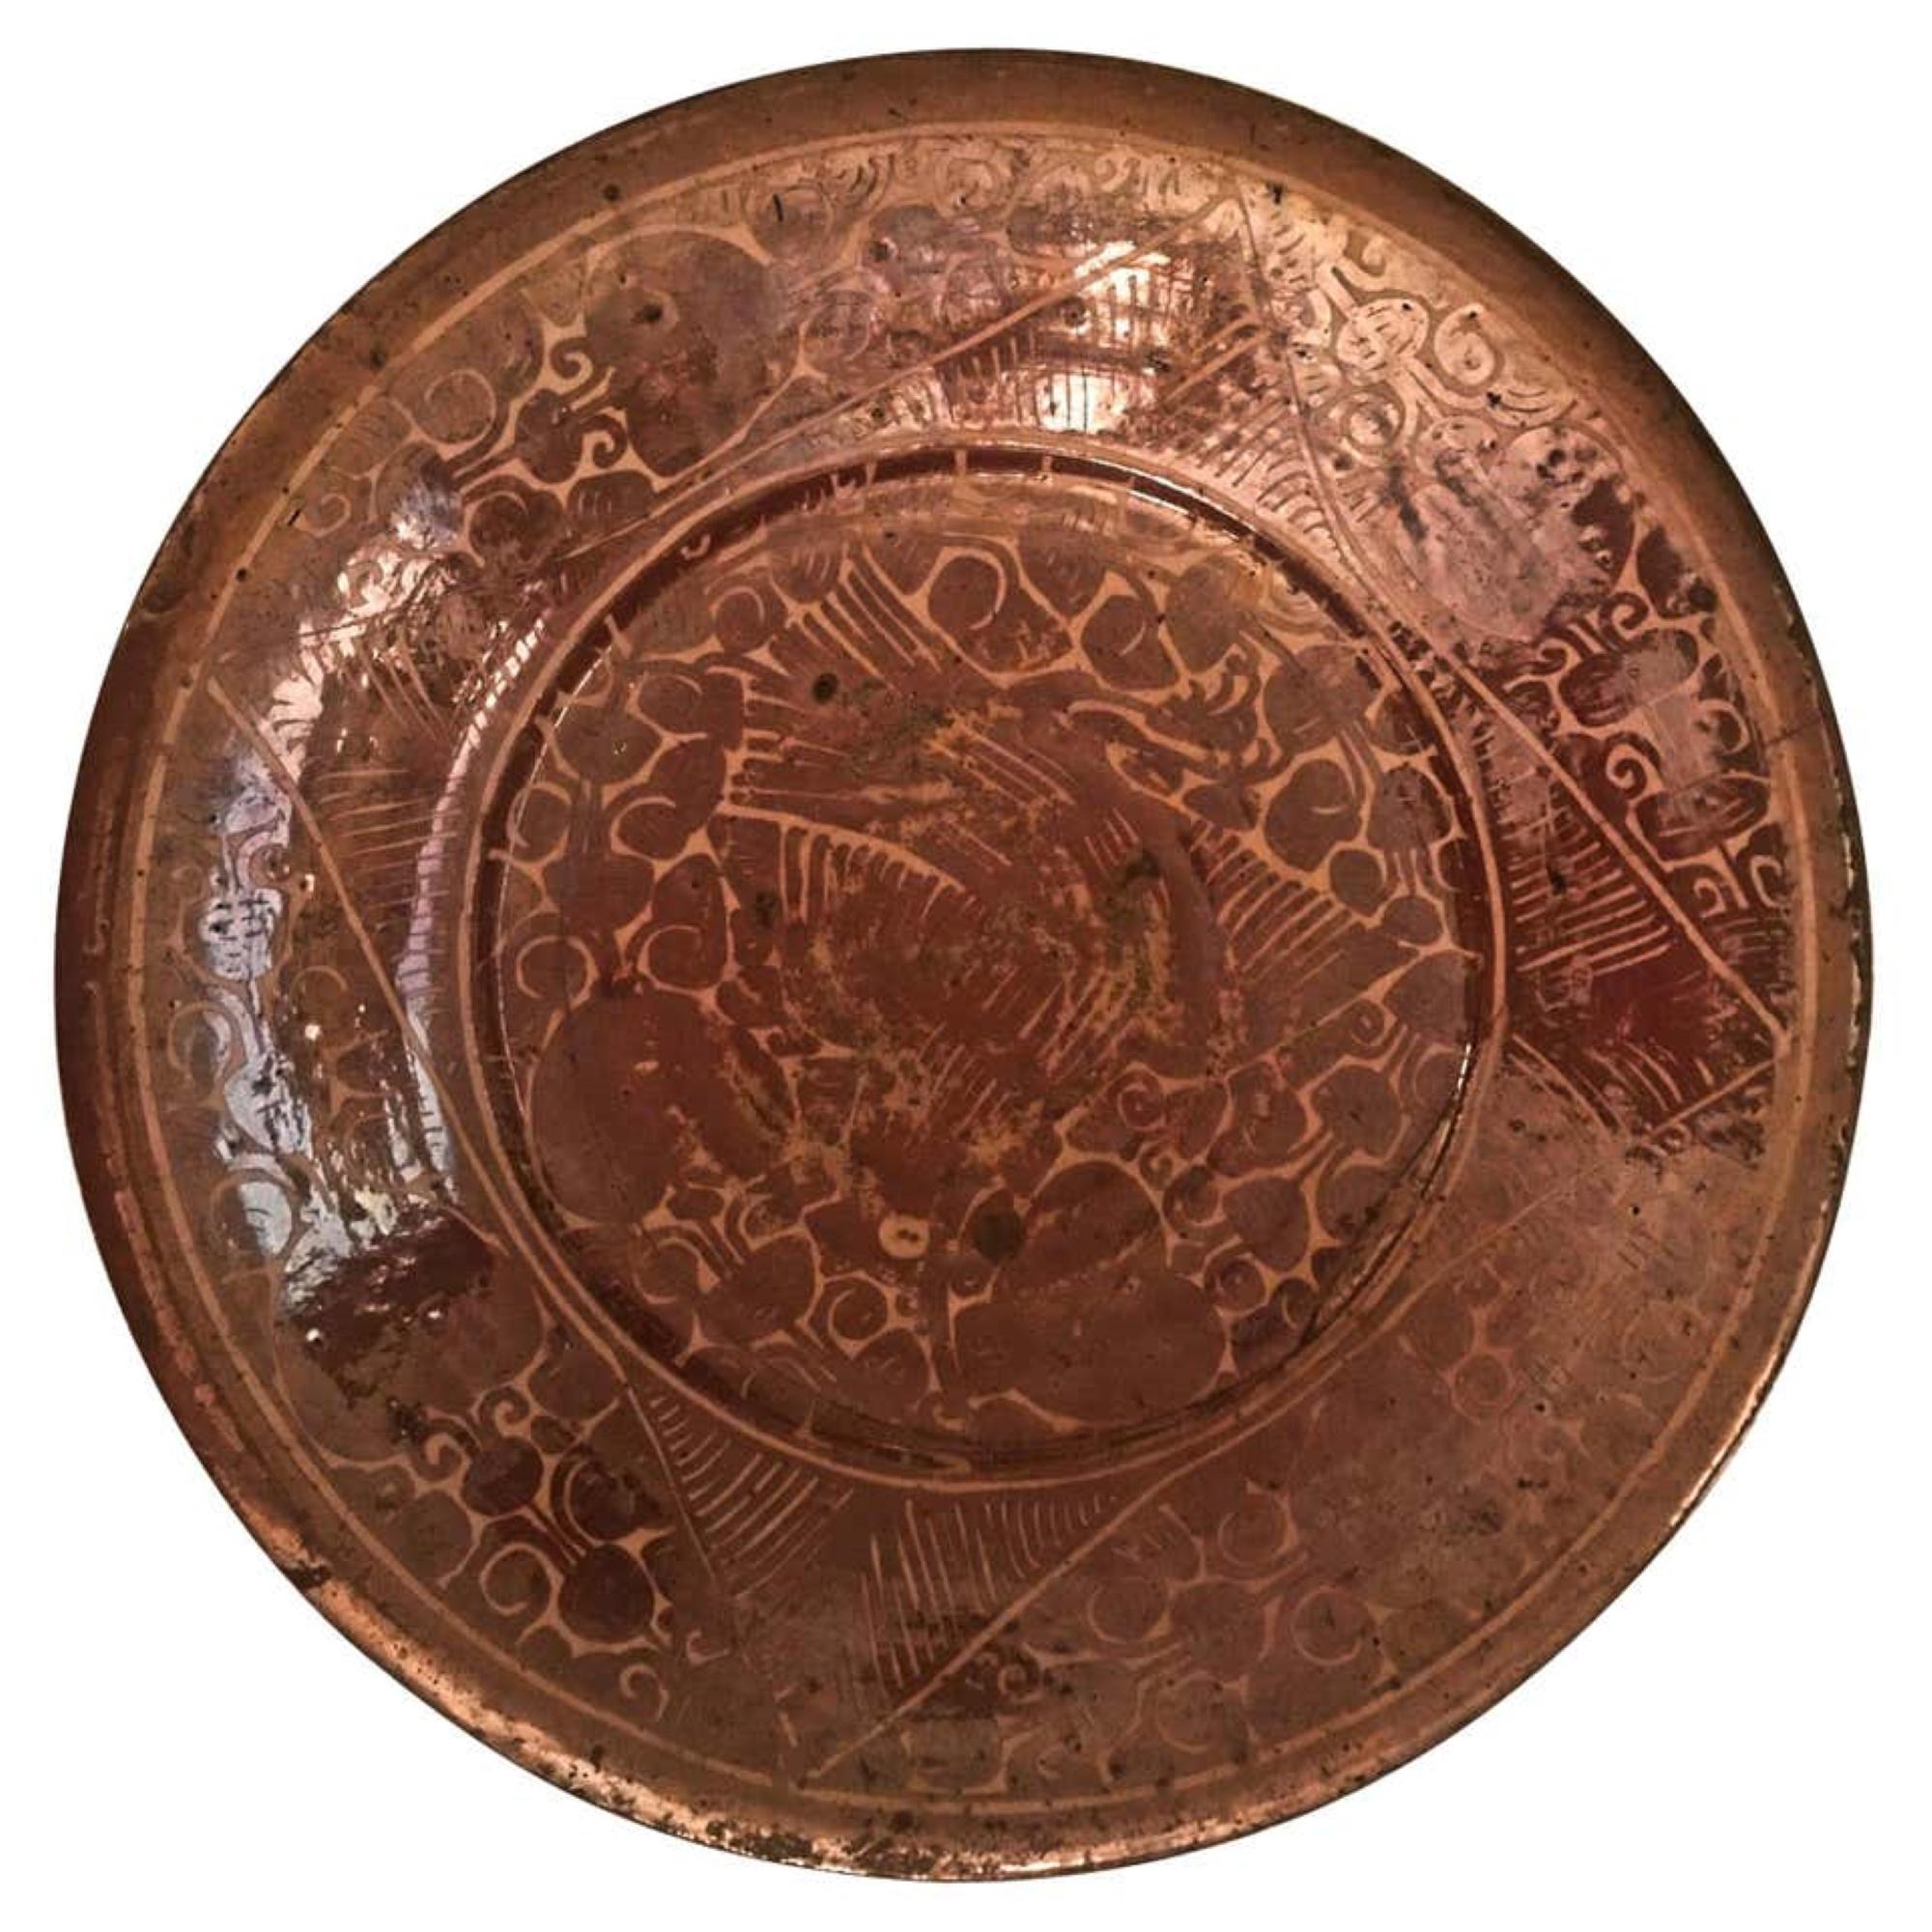 Ancient rare Kashan lustre bowl 12th century Islamic pottery art.

This beautifully decorated and well cared for lustre bowl is one of the few examples still in existence. It was made in Kashan in the 12th-early 13th century, Seljuk- Atabeg